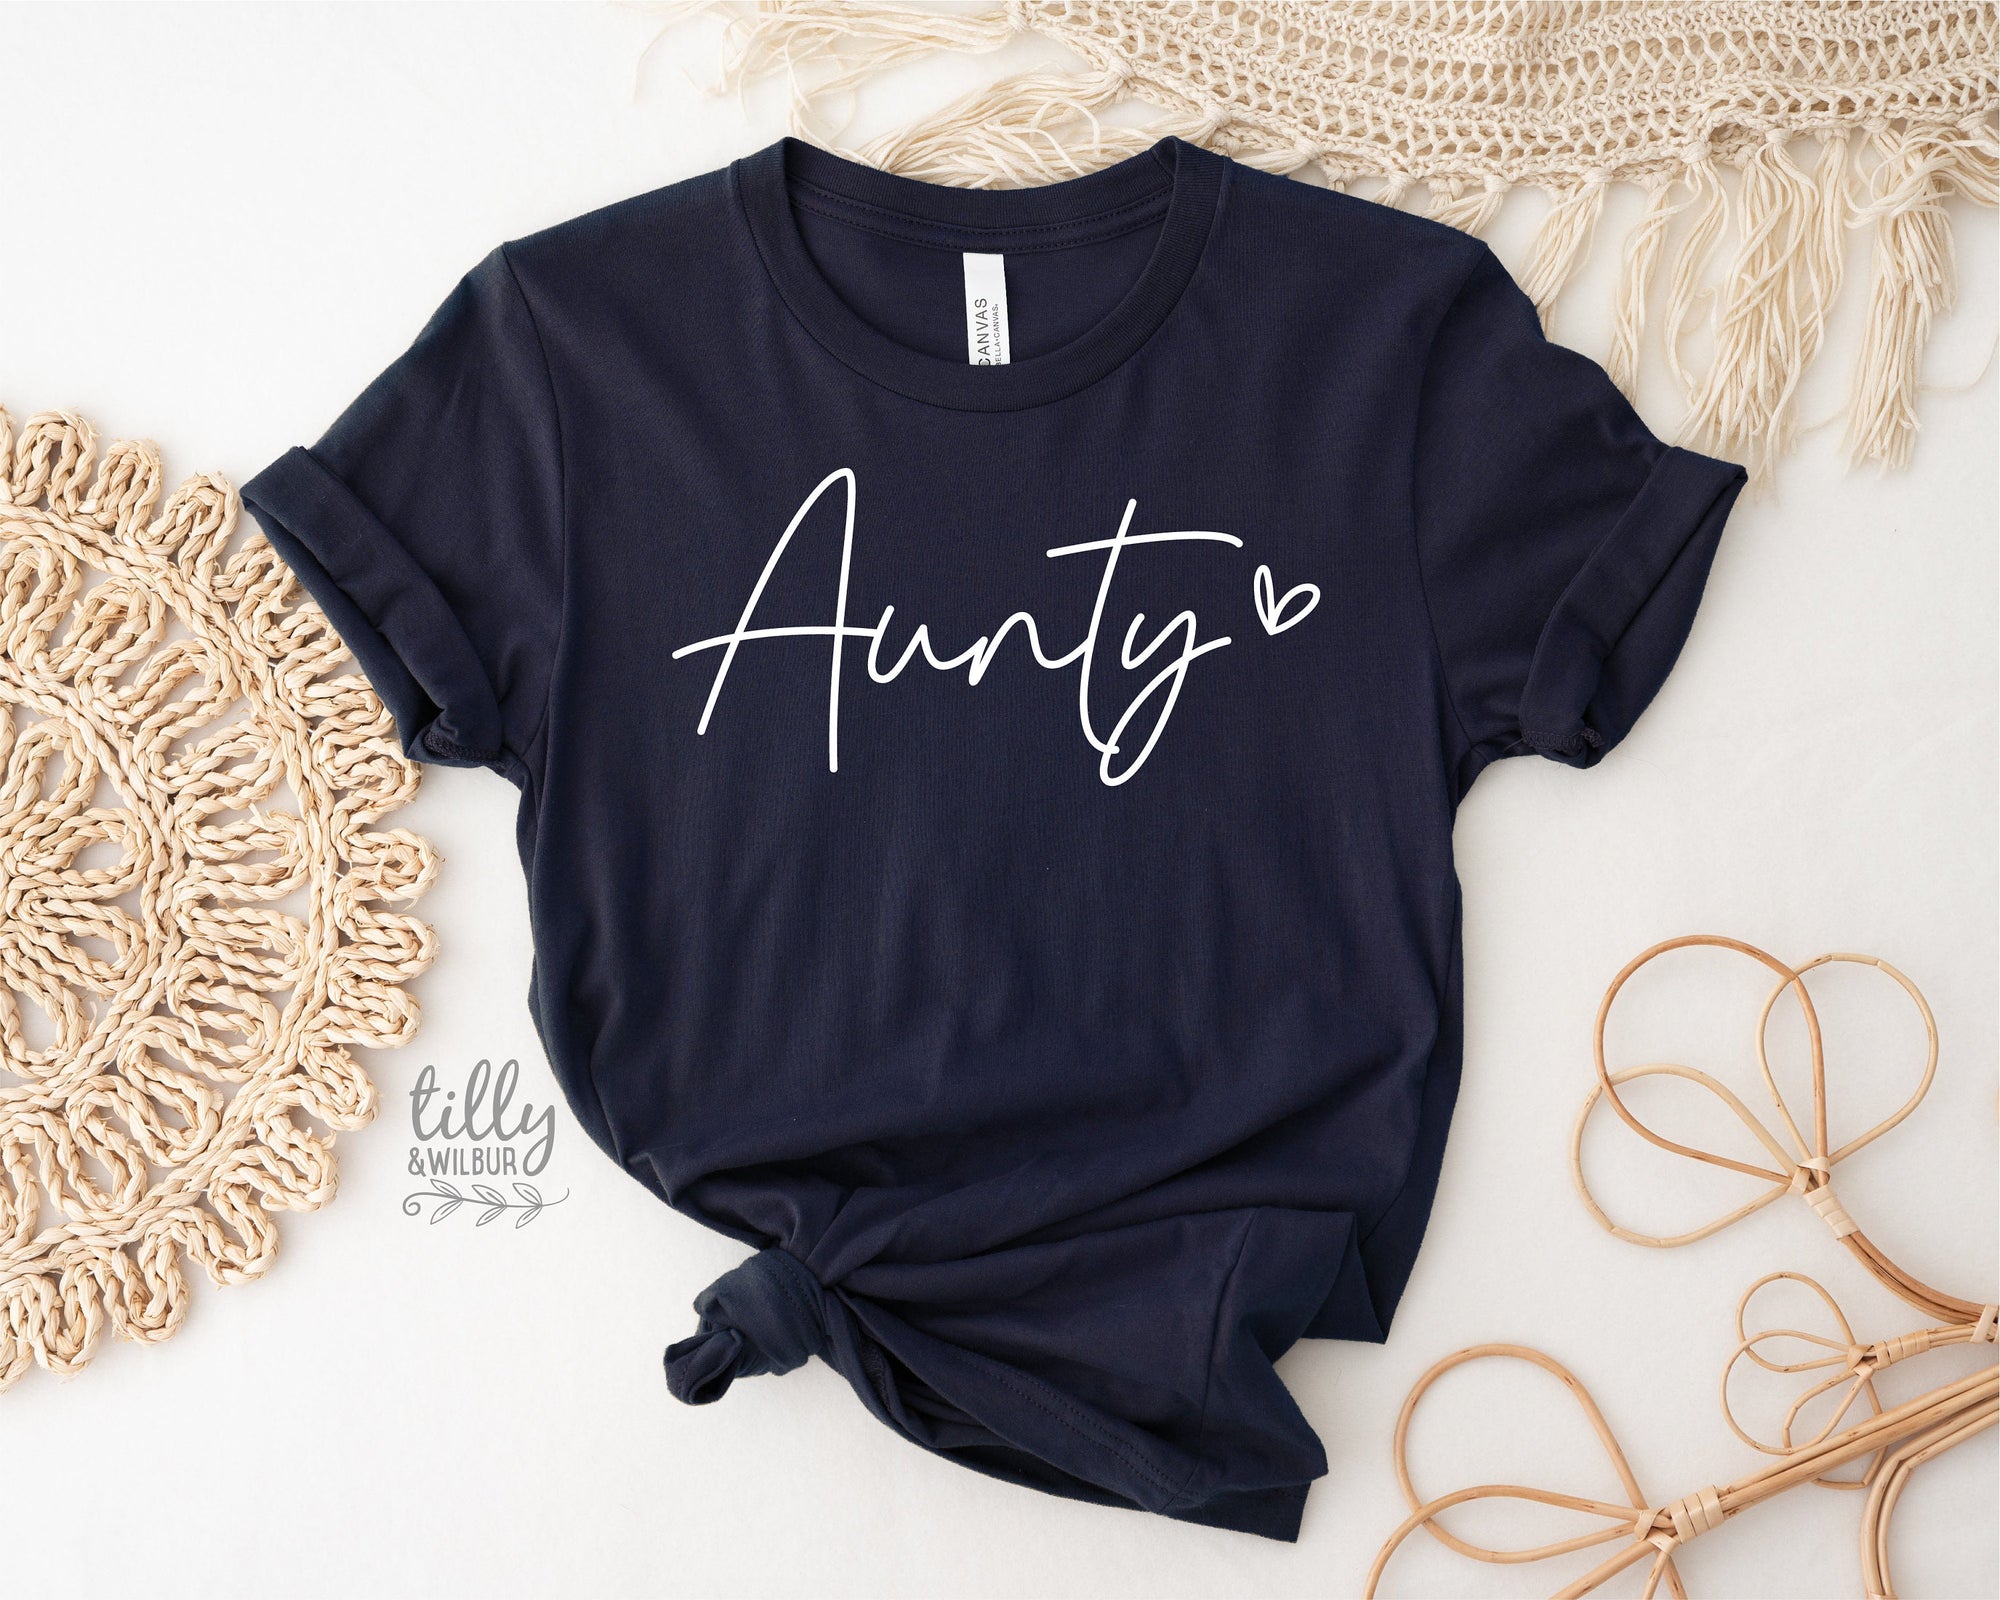 Aunty T-Shirt, Pregnancy Announcement T-Shirt, I'm Going To Be An Aunty, Baby Shower Gift, Aunty, Auntie, Sister Gift, Navy Blue With White